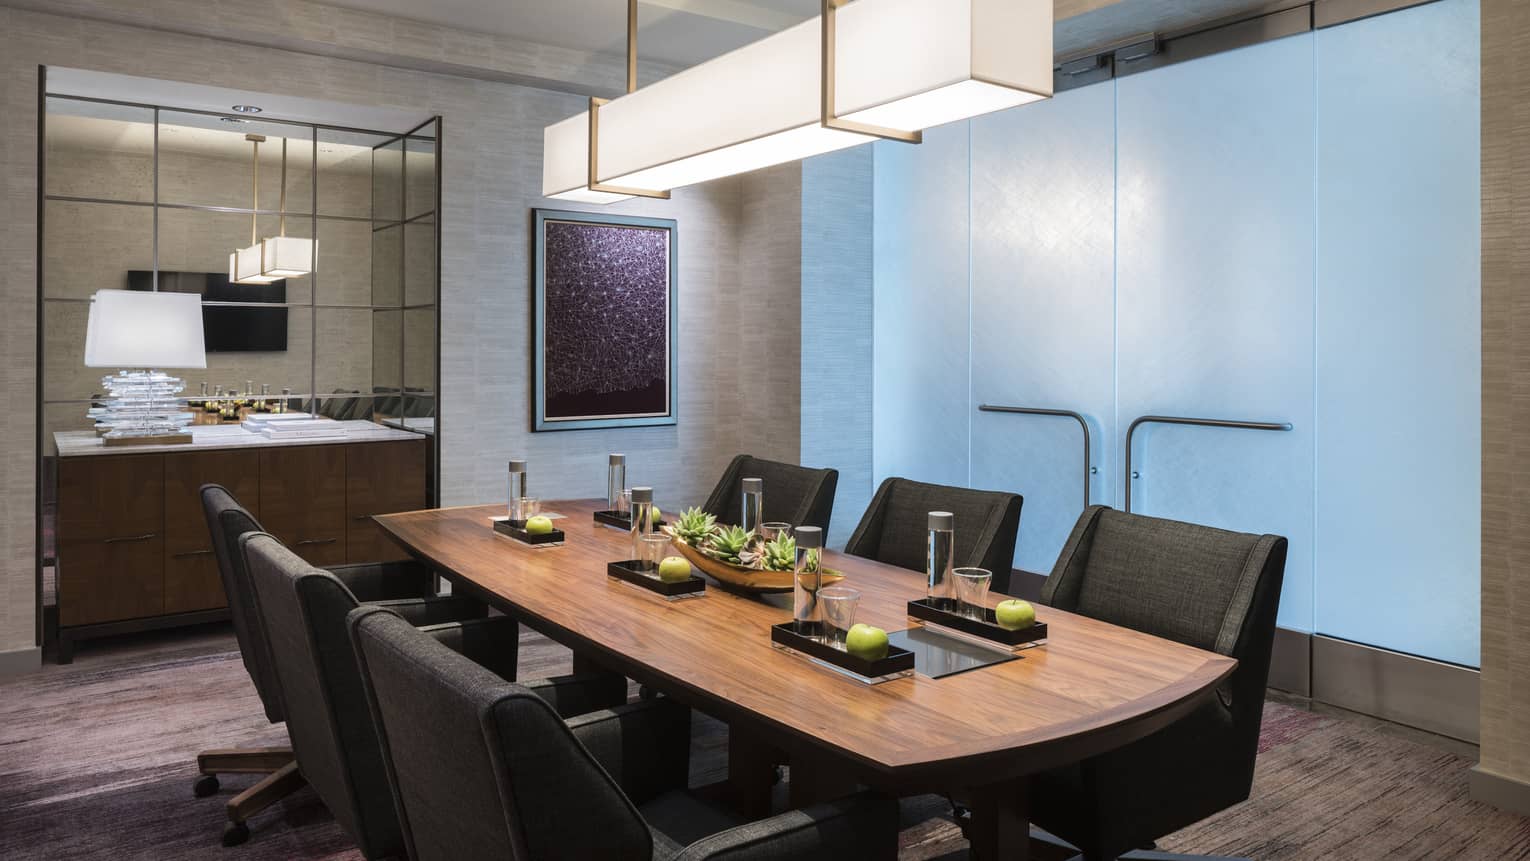 Wood boardroom meeting table with black executive chairs under modern light, glass wall